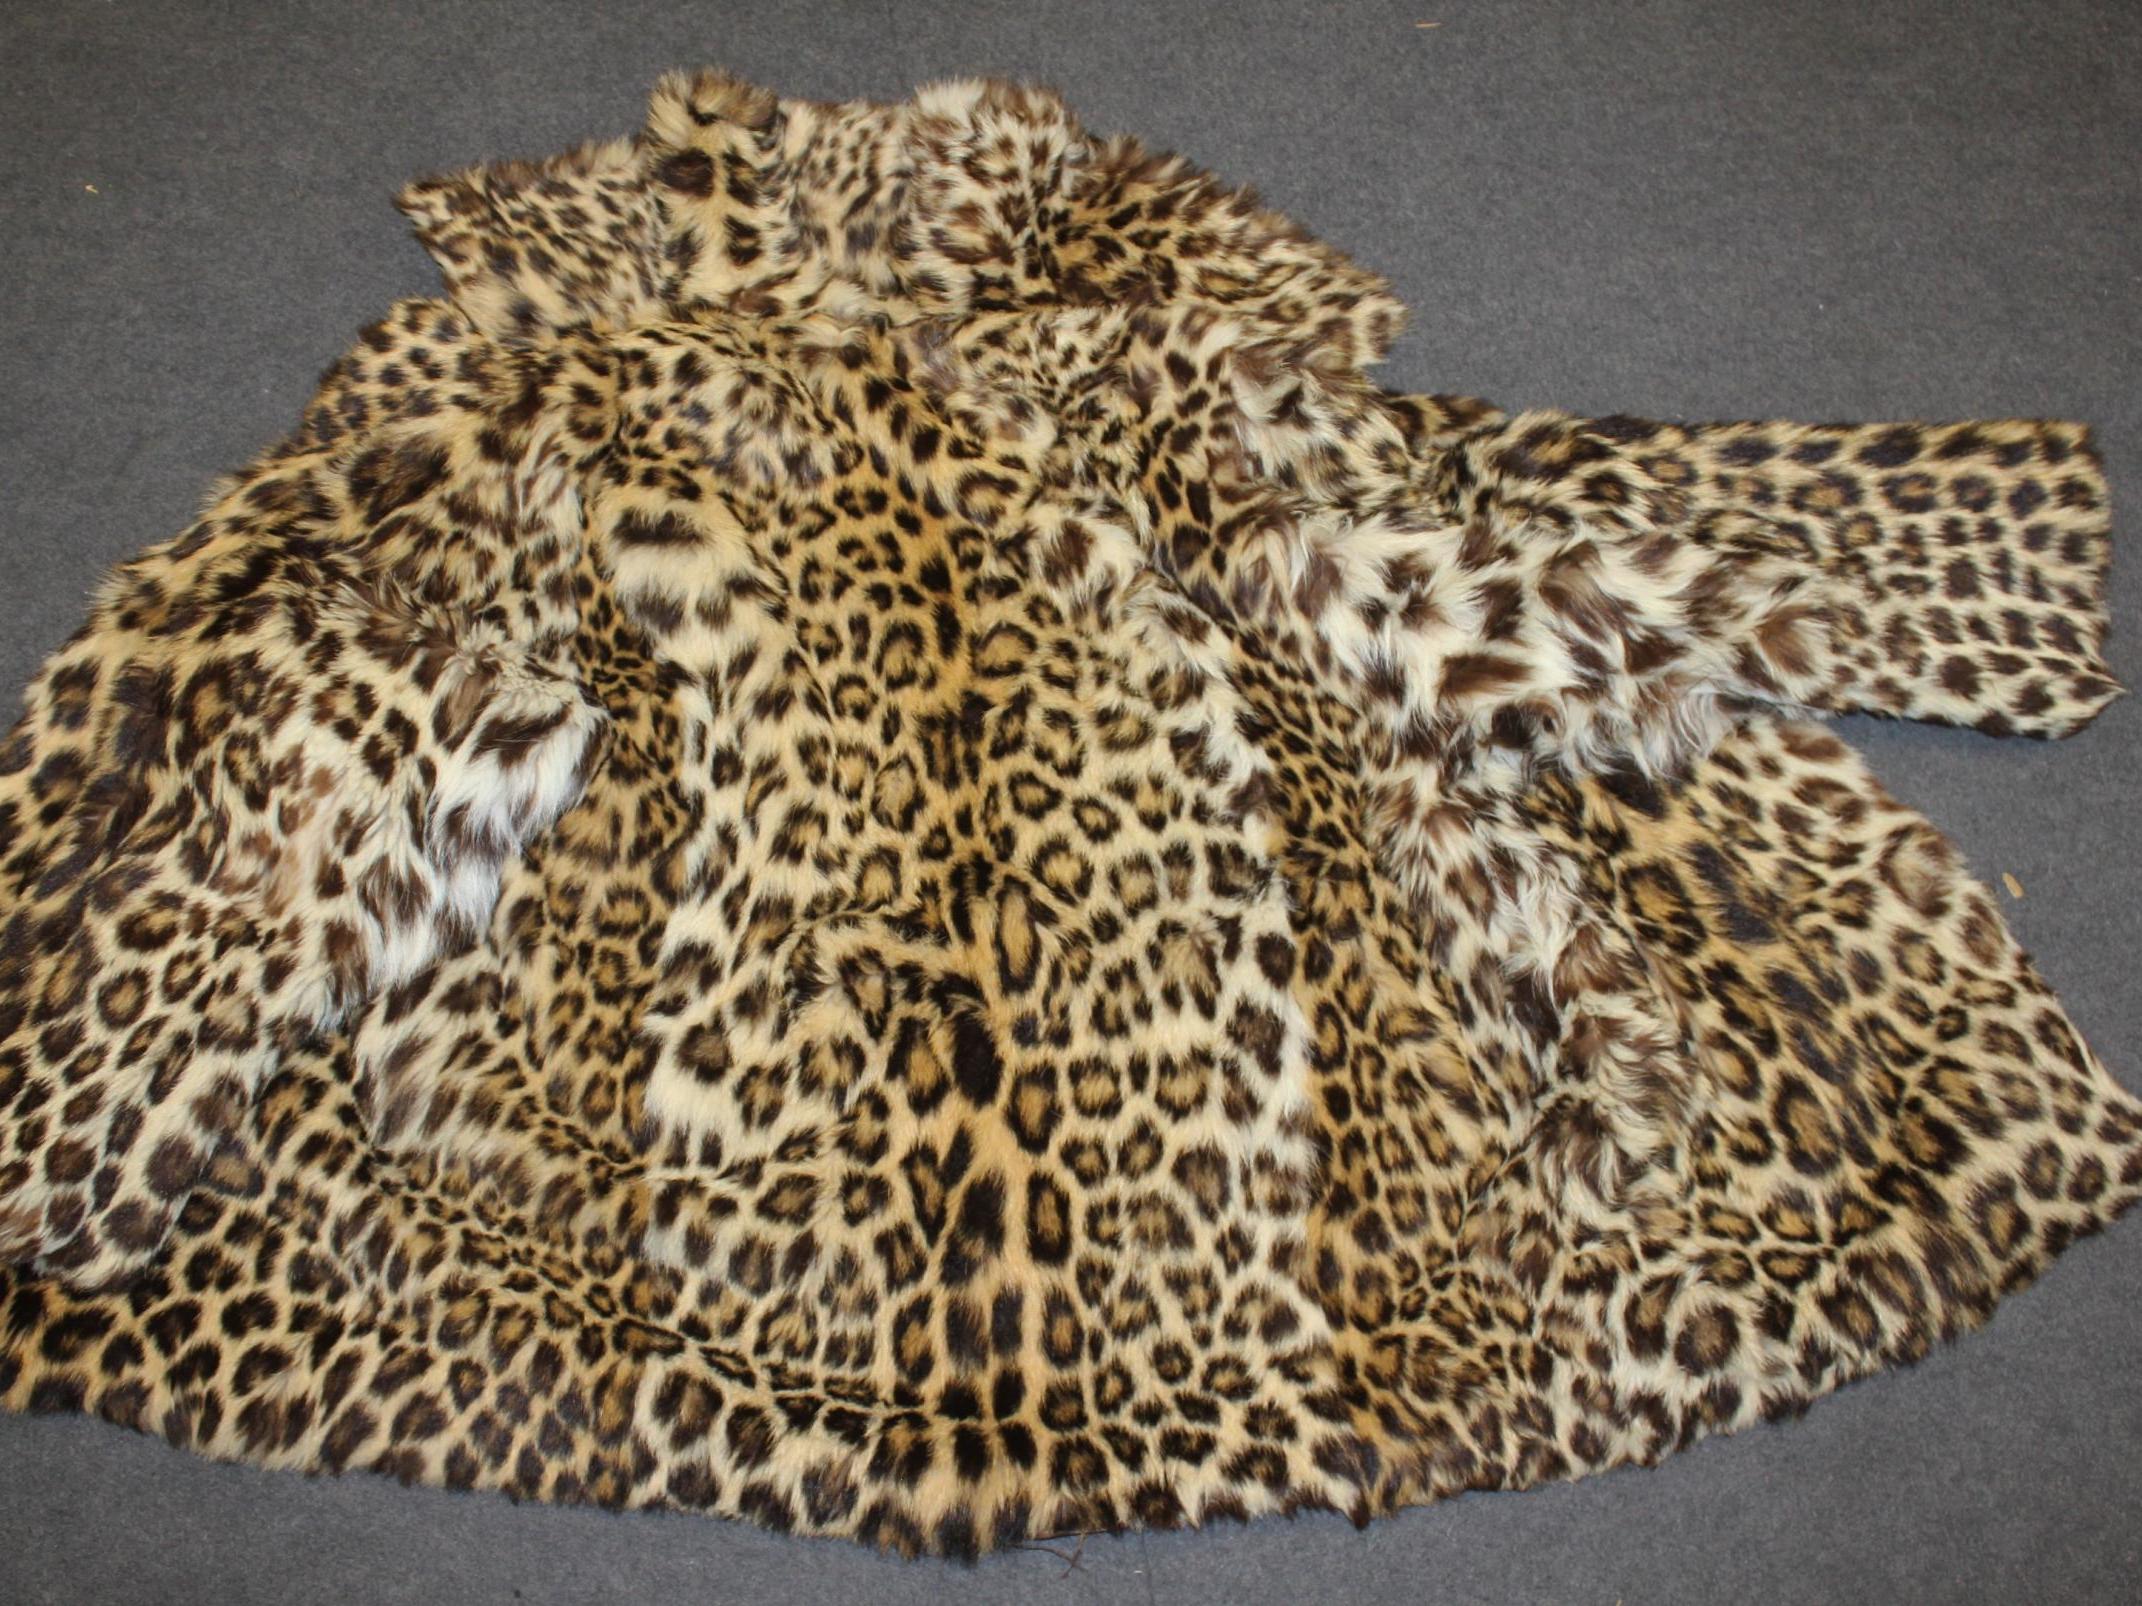 A leopard fur coat offered for sale by Timothy Norris over eBay